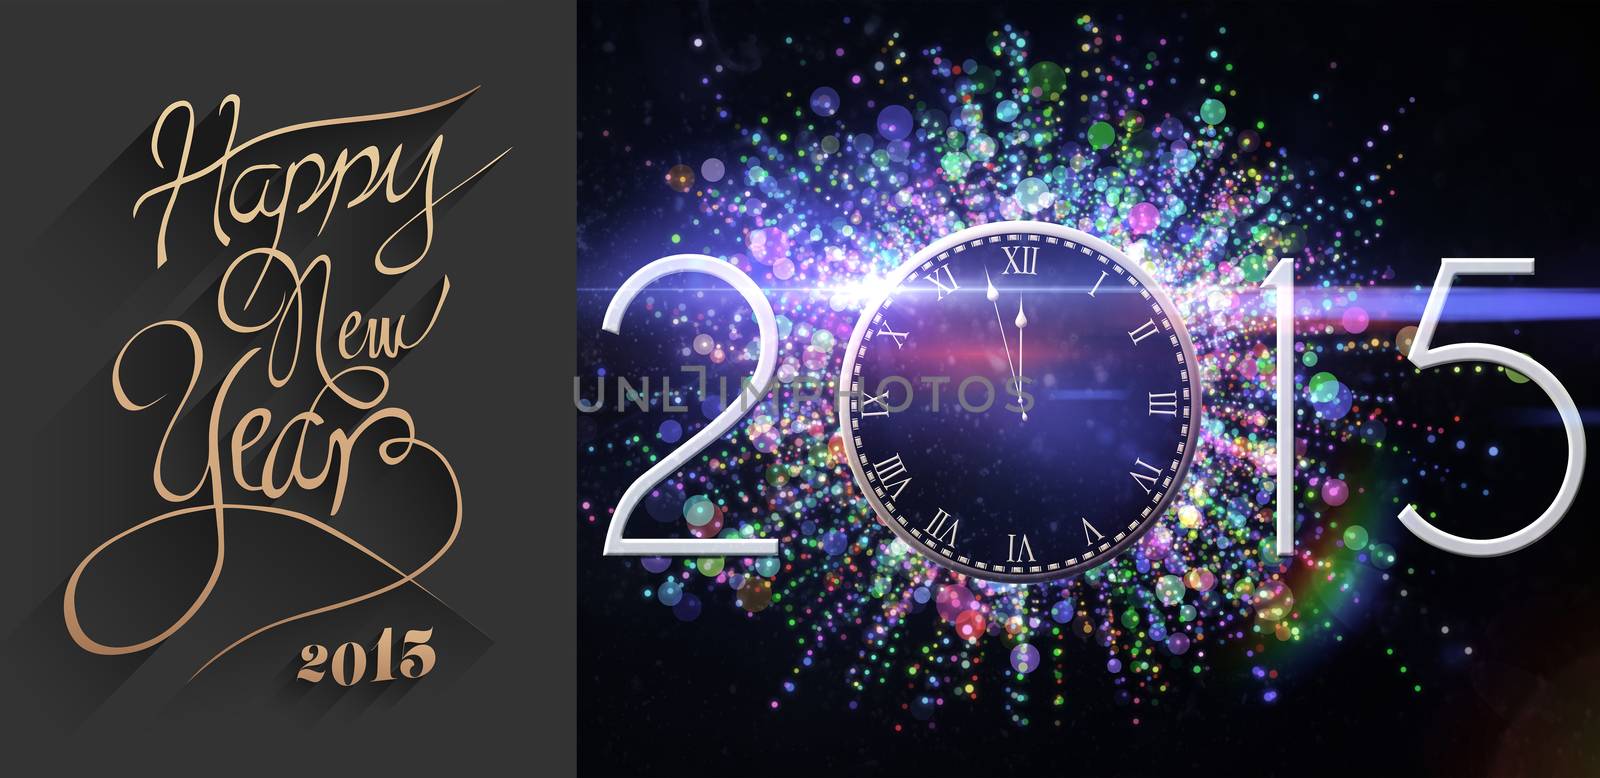 Classy new year greeting against black and purple new year graphic